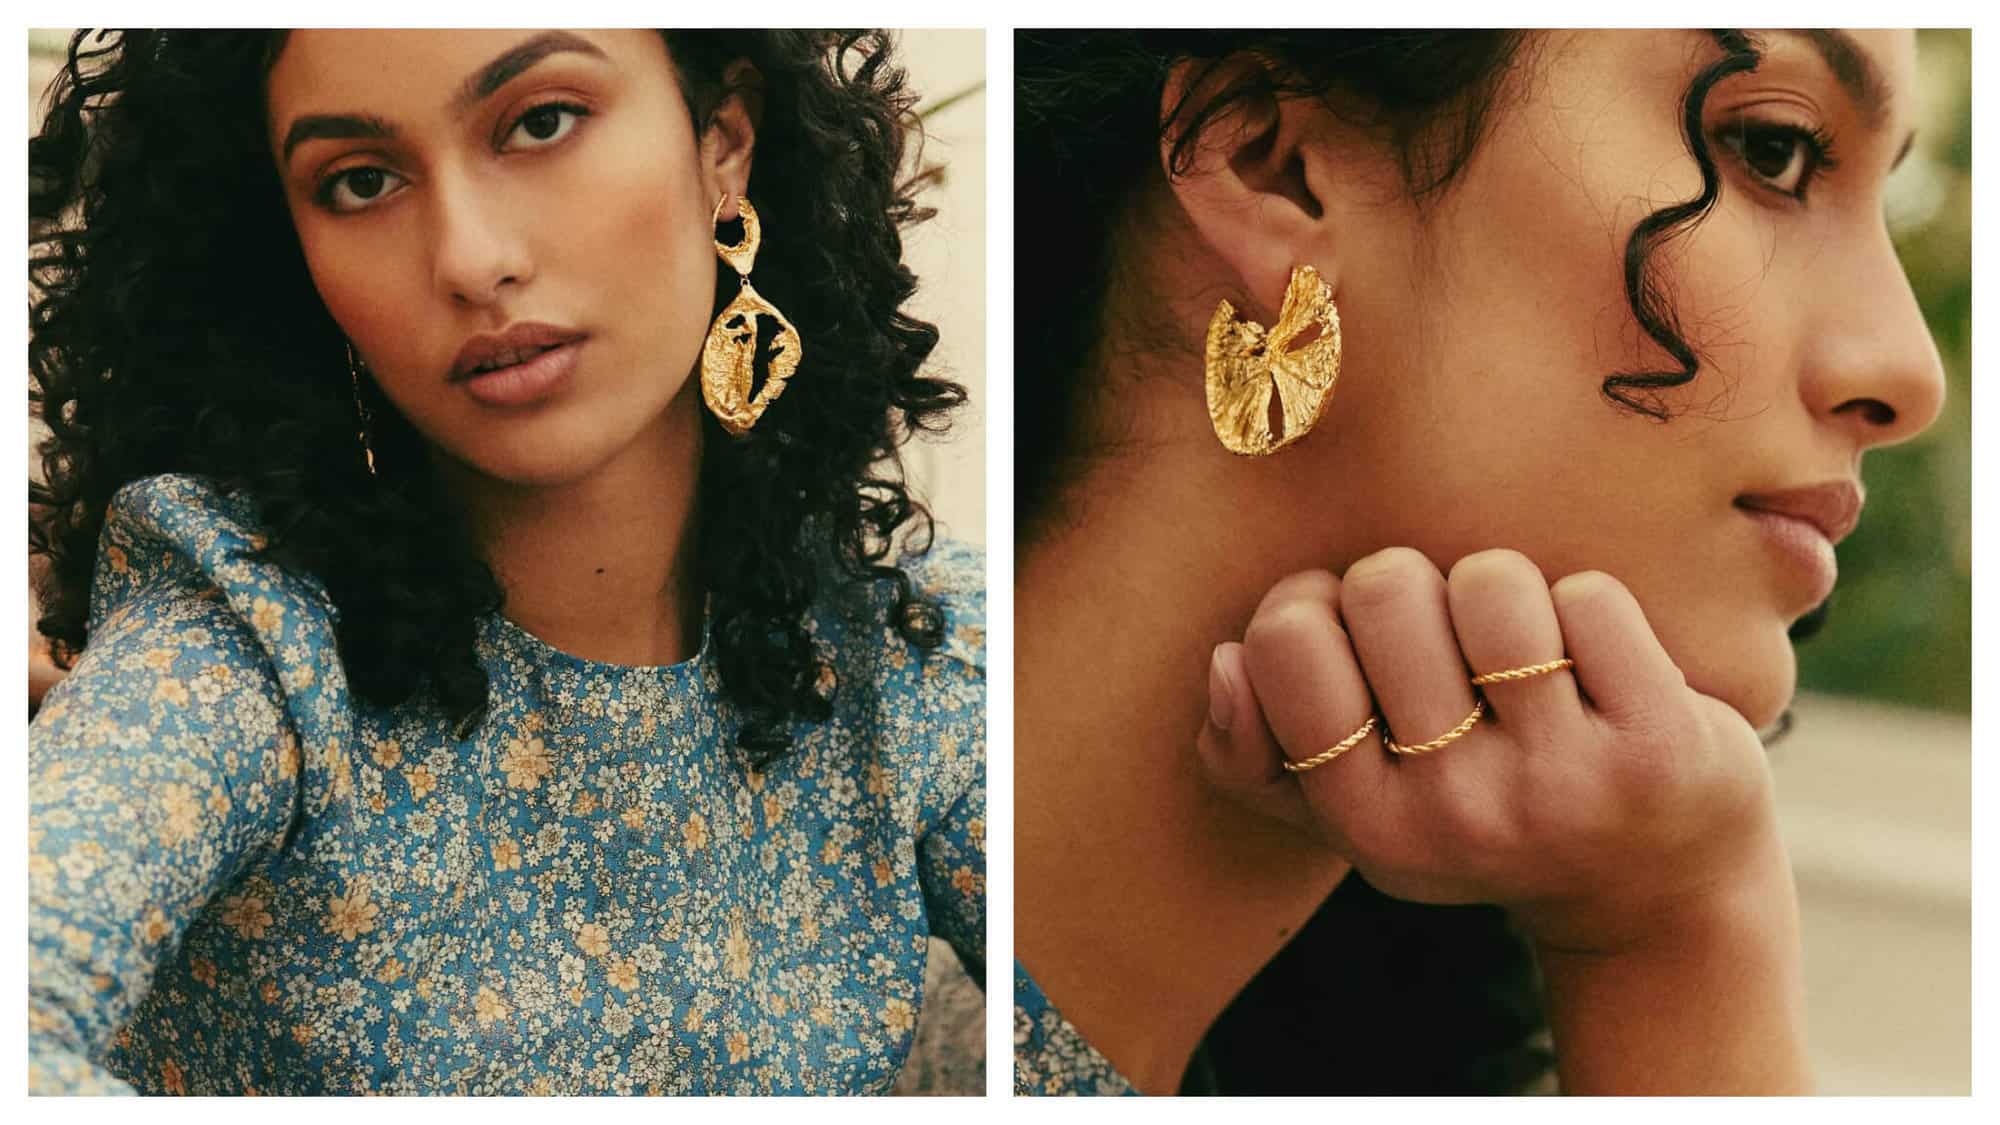 Left: a woman with curly dark hair in a blue and yellow floral top wearing gold earrings by Elise Tsikis. Right: the same woman wearing another pair of gold earrings and rings by Elise Tsikis.